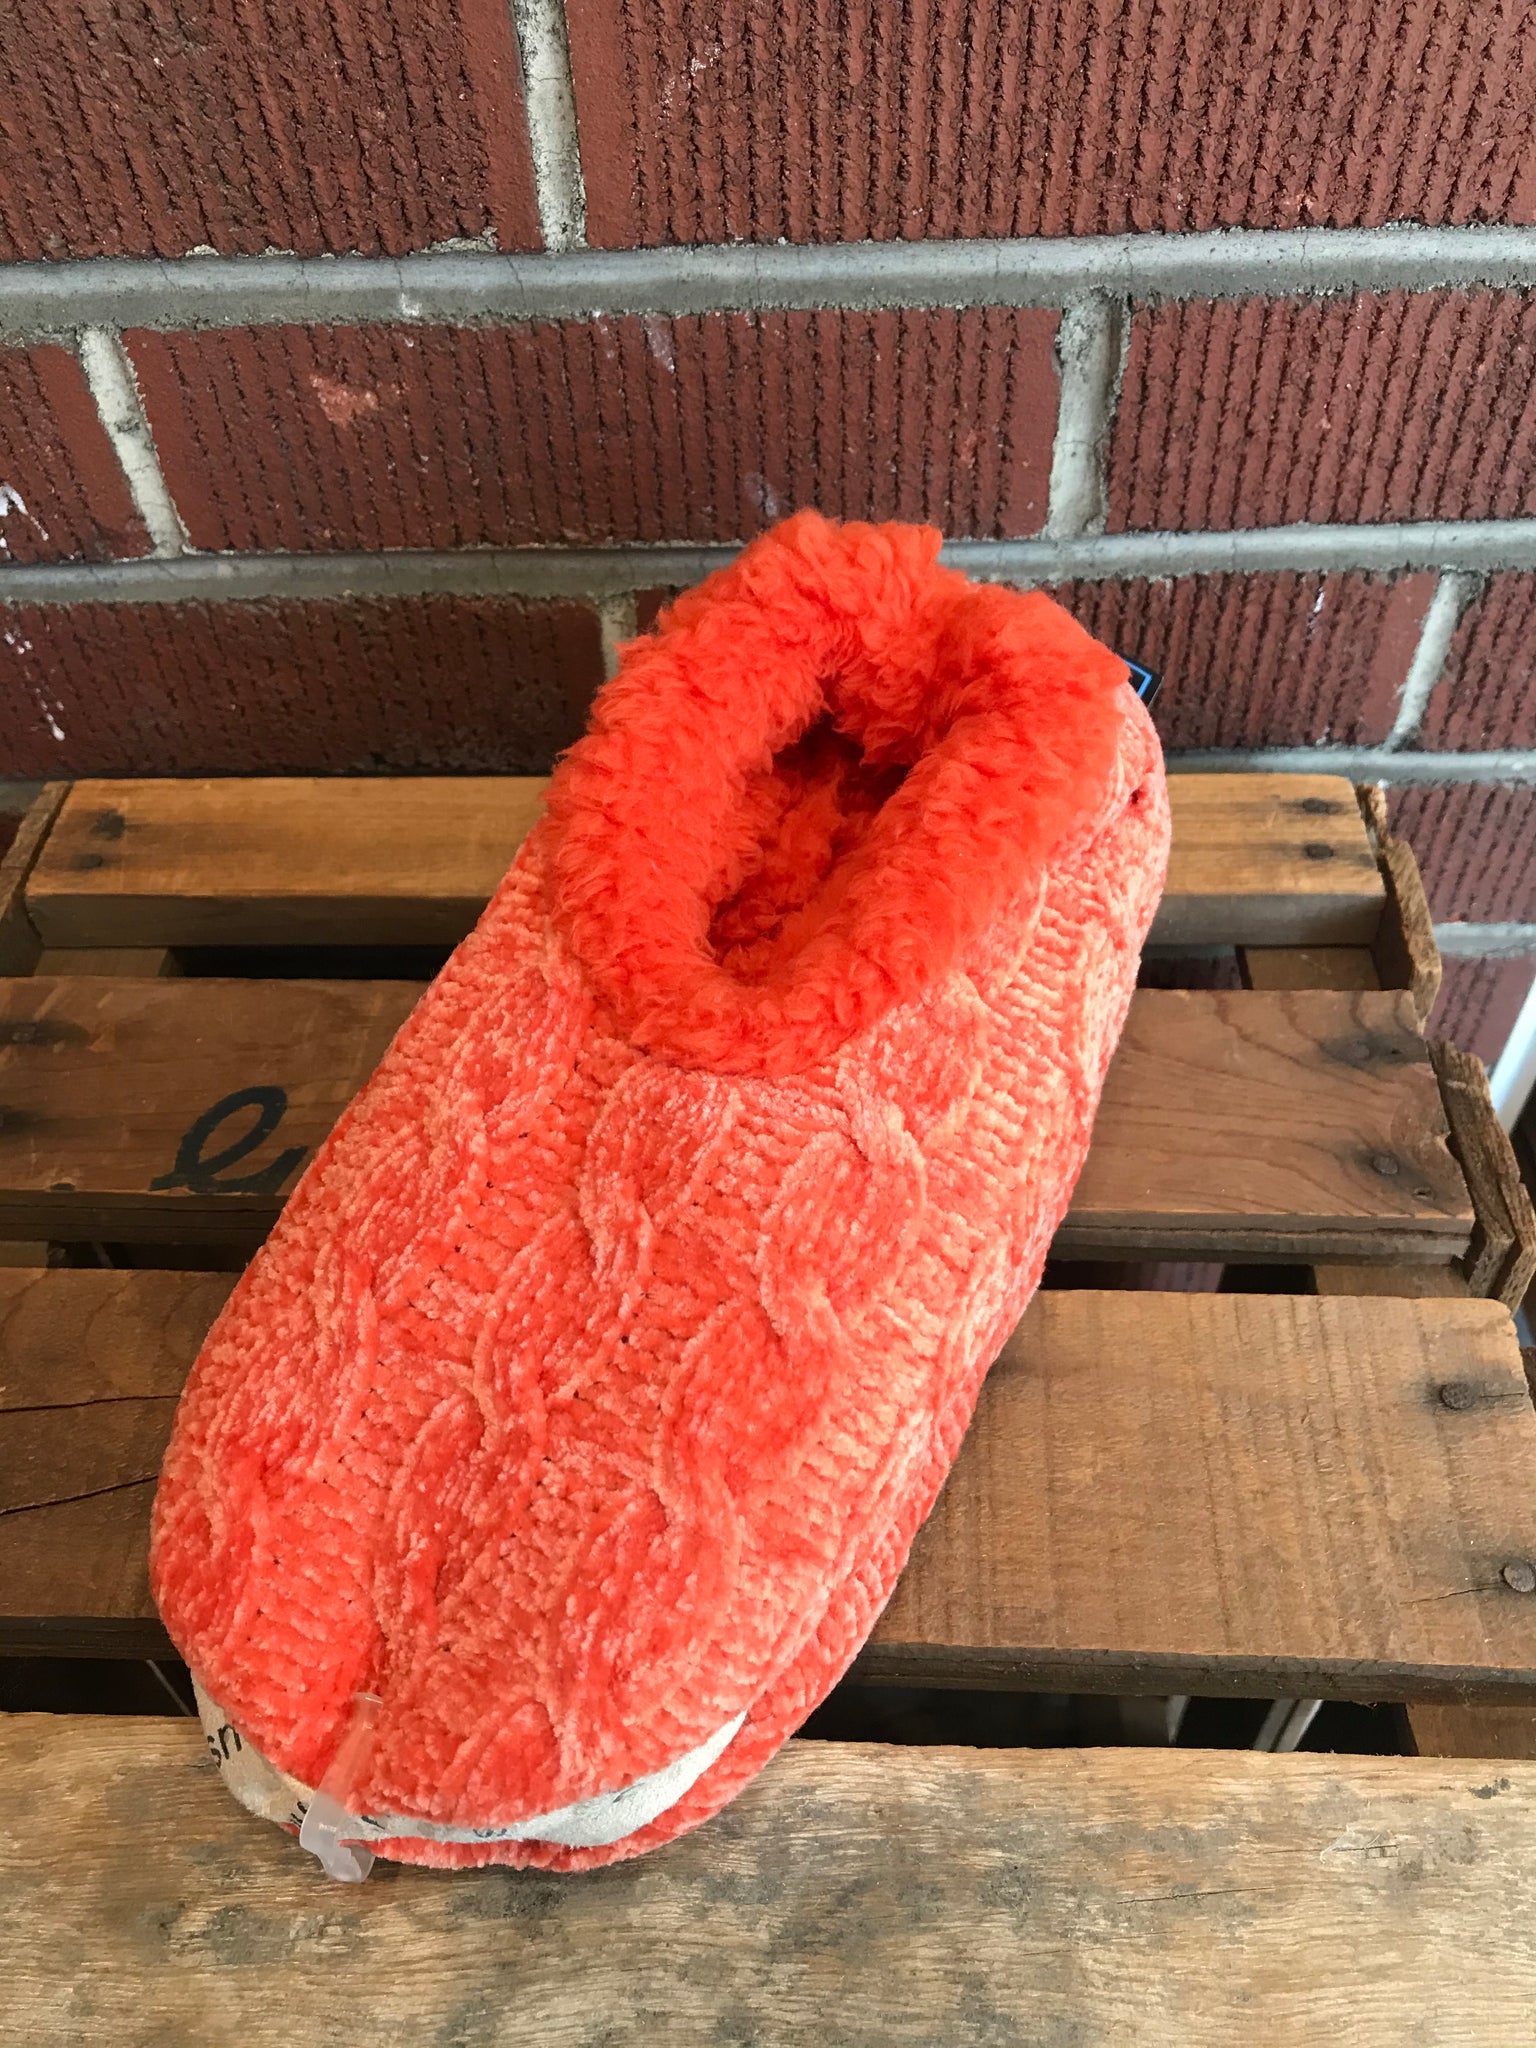 snoozies chenille slippers